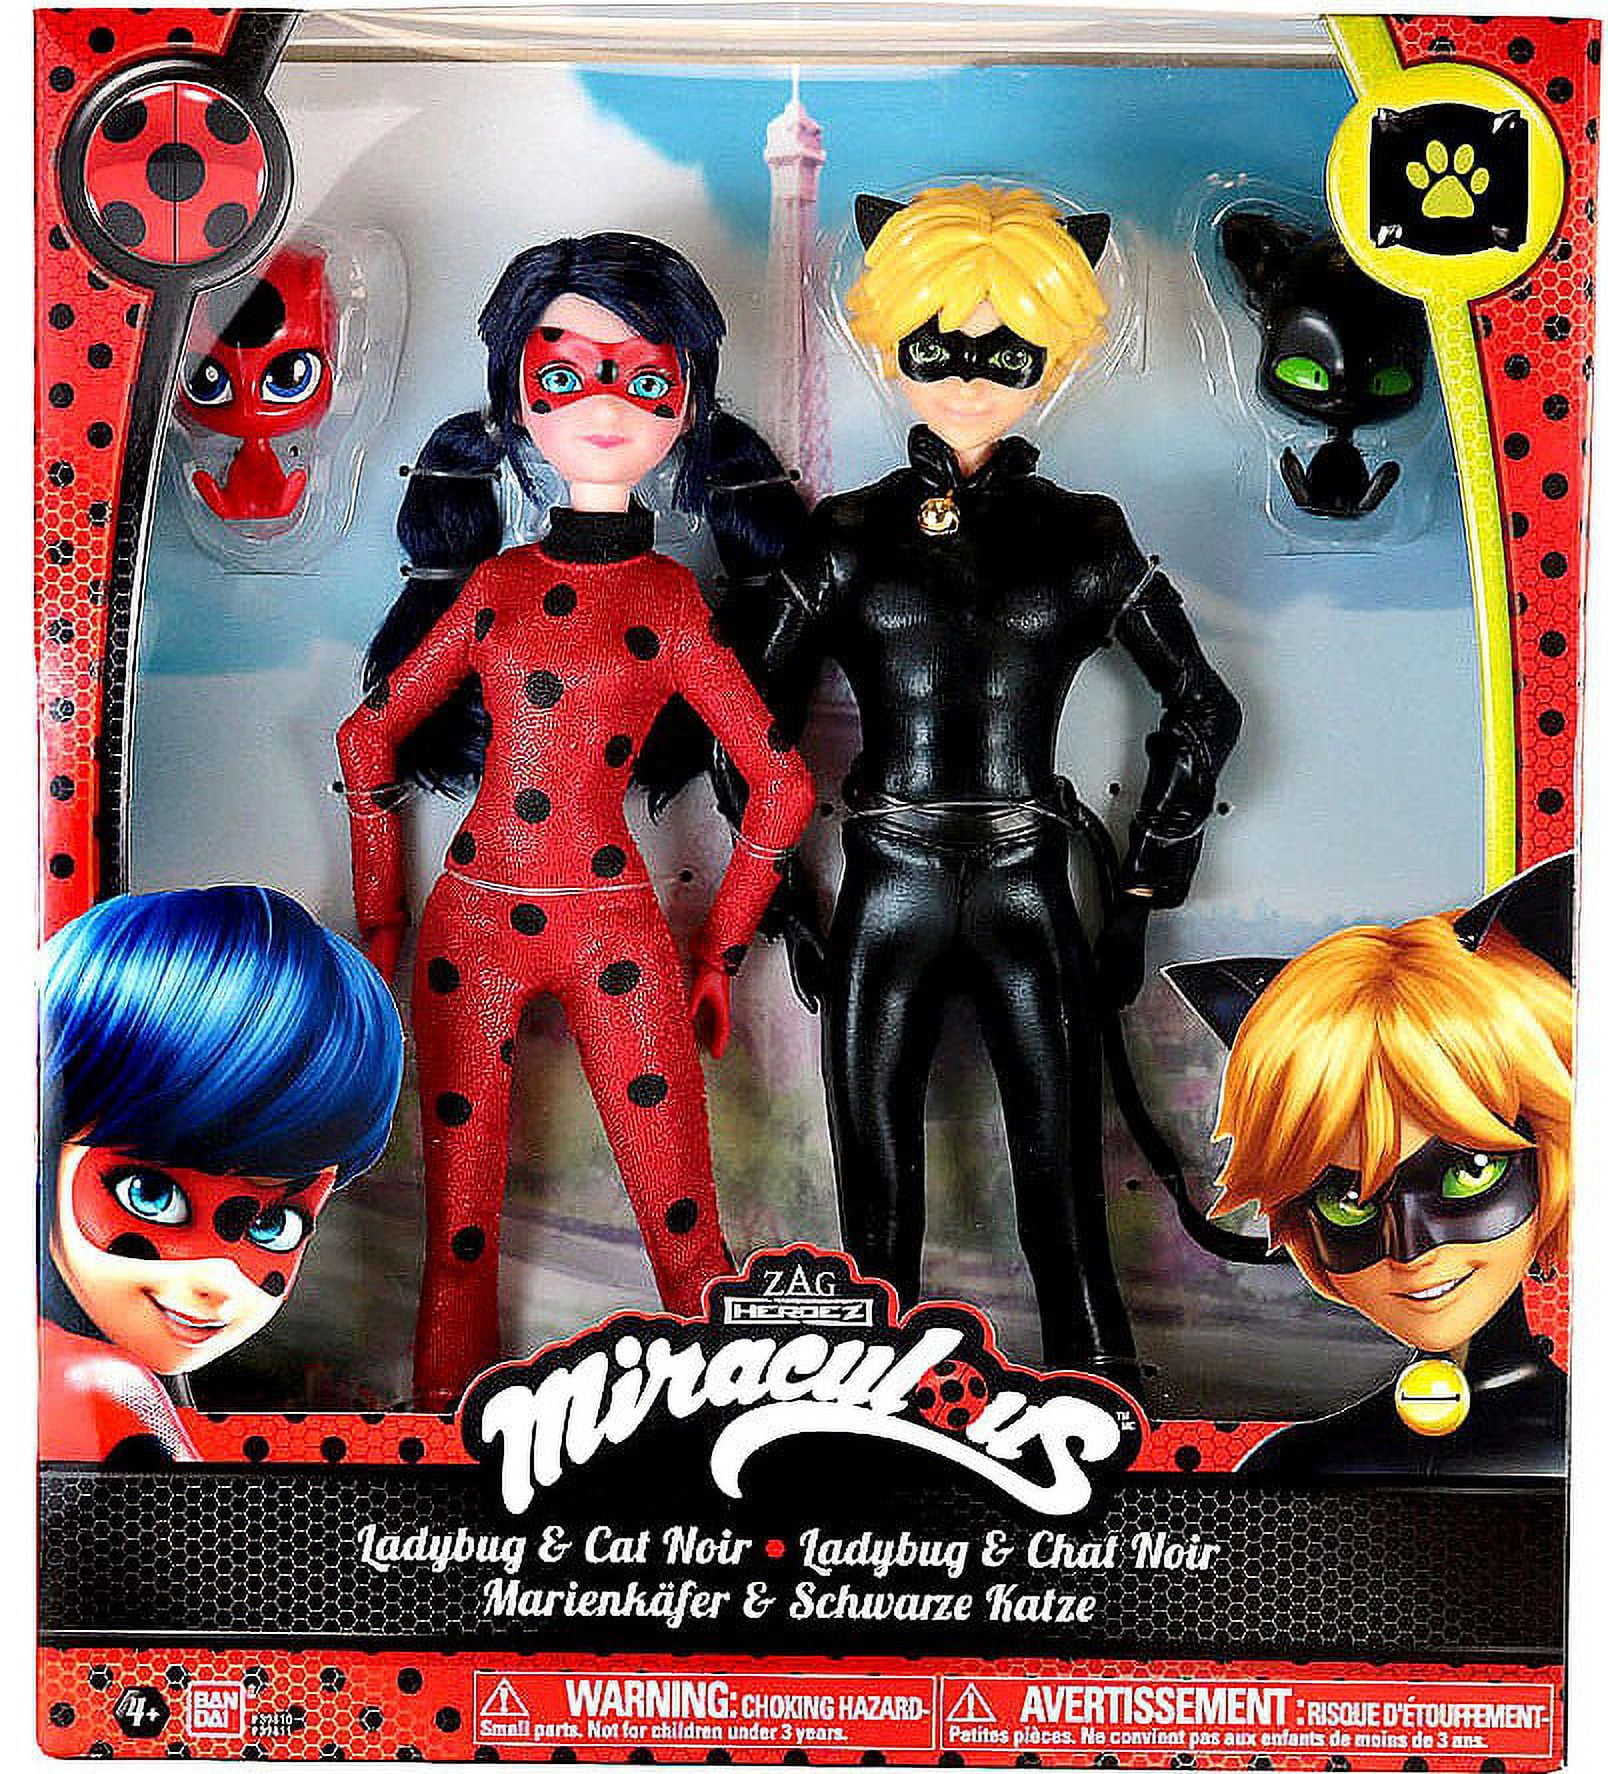 Miraculous Ladybug & Cat Noir movie dolls unboxing featuring the e-Bee